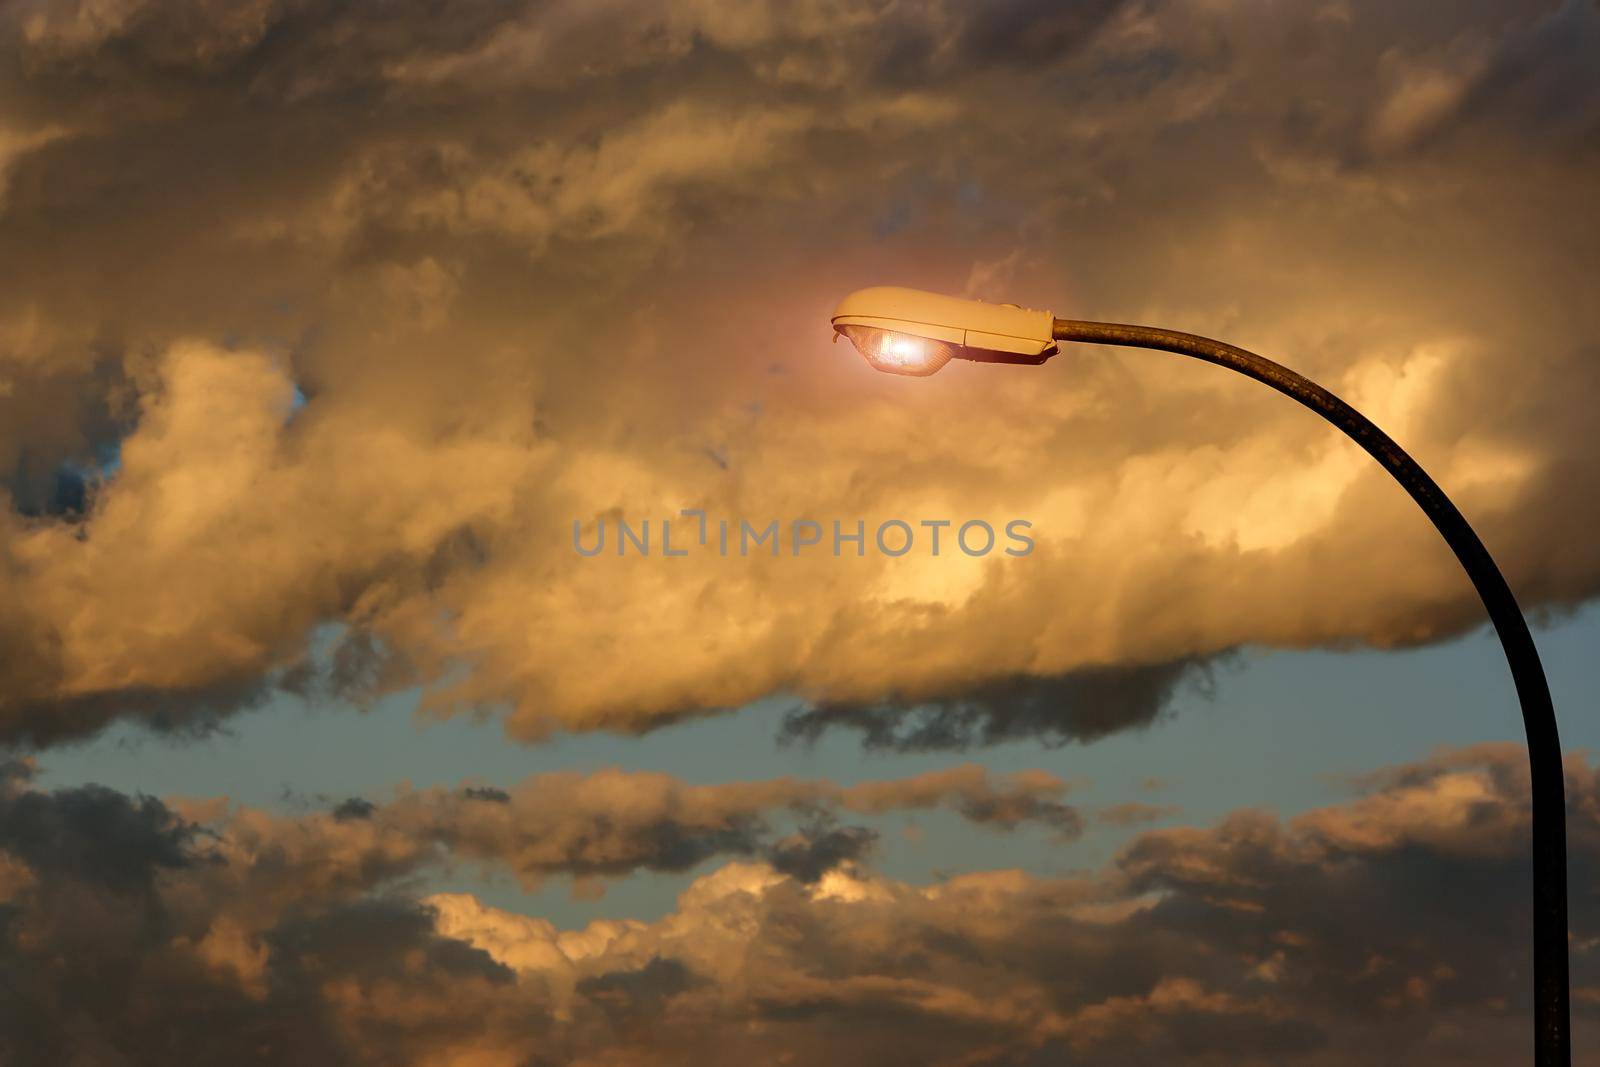 Street lamp lit with storm clouds in the background.